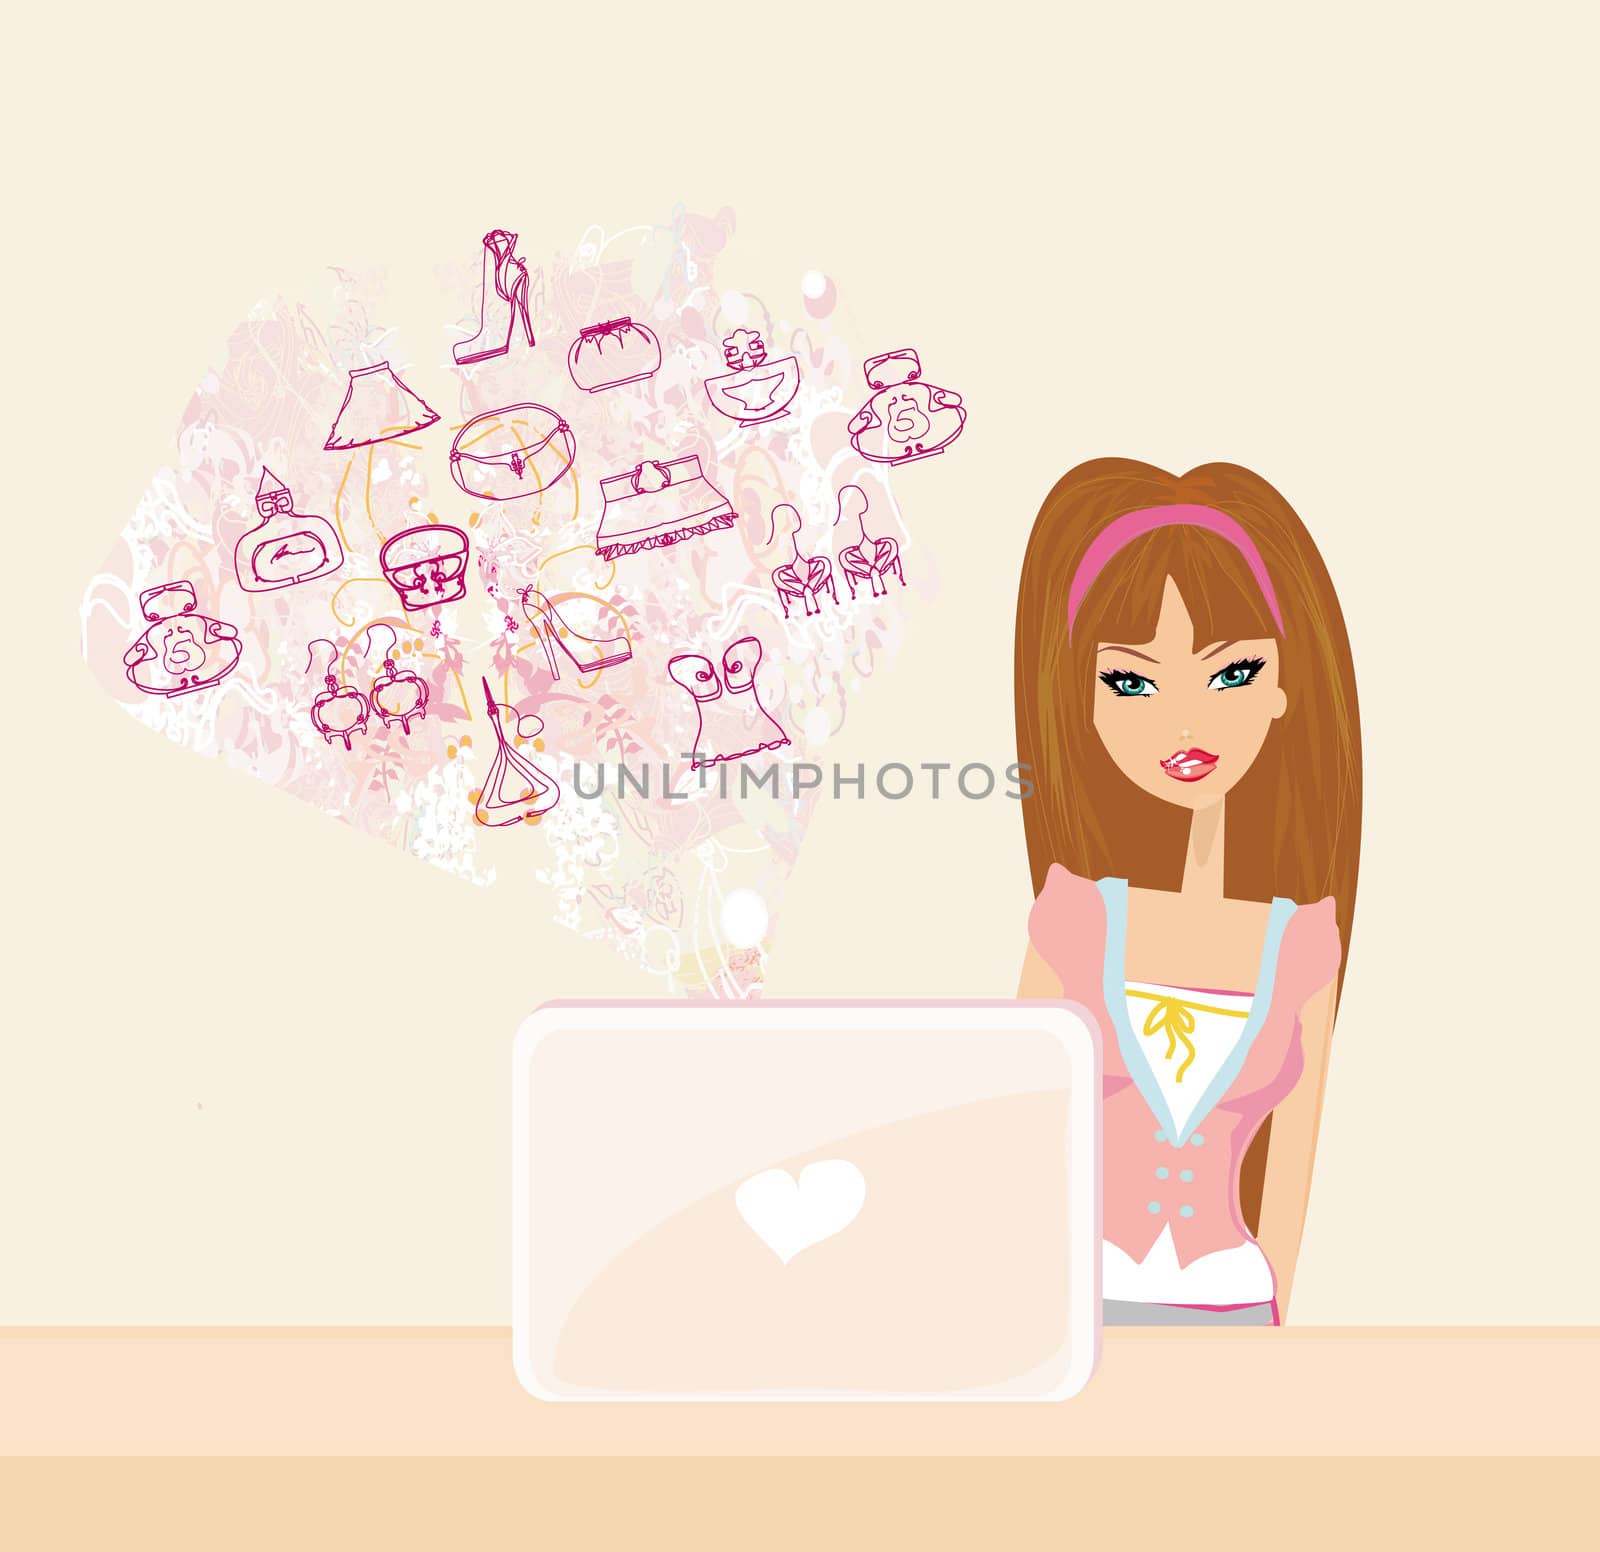 Online shopping - young smiling woman sitting with laptop computer